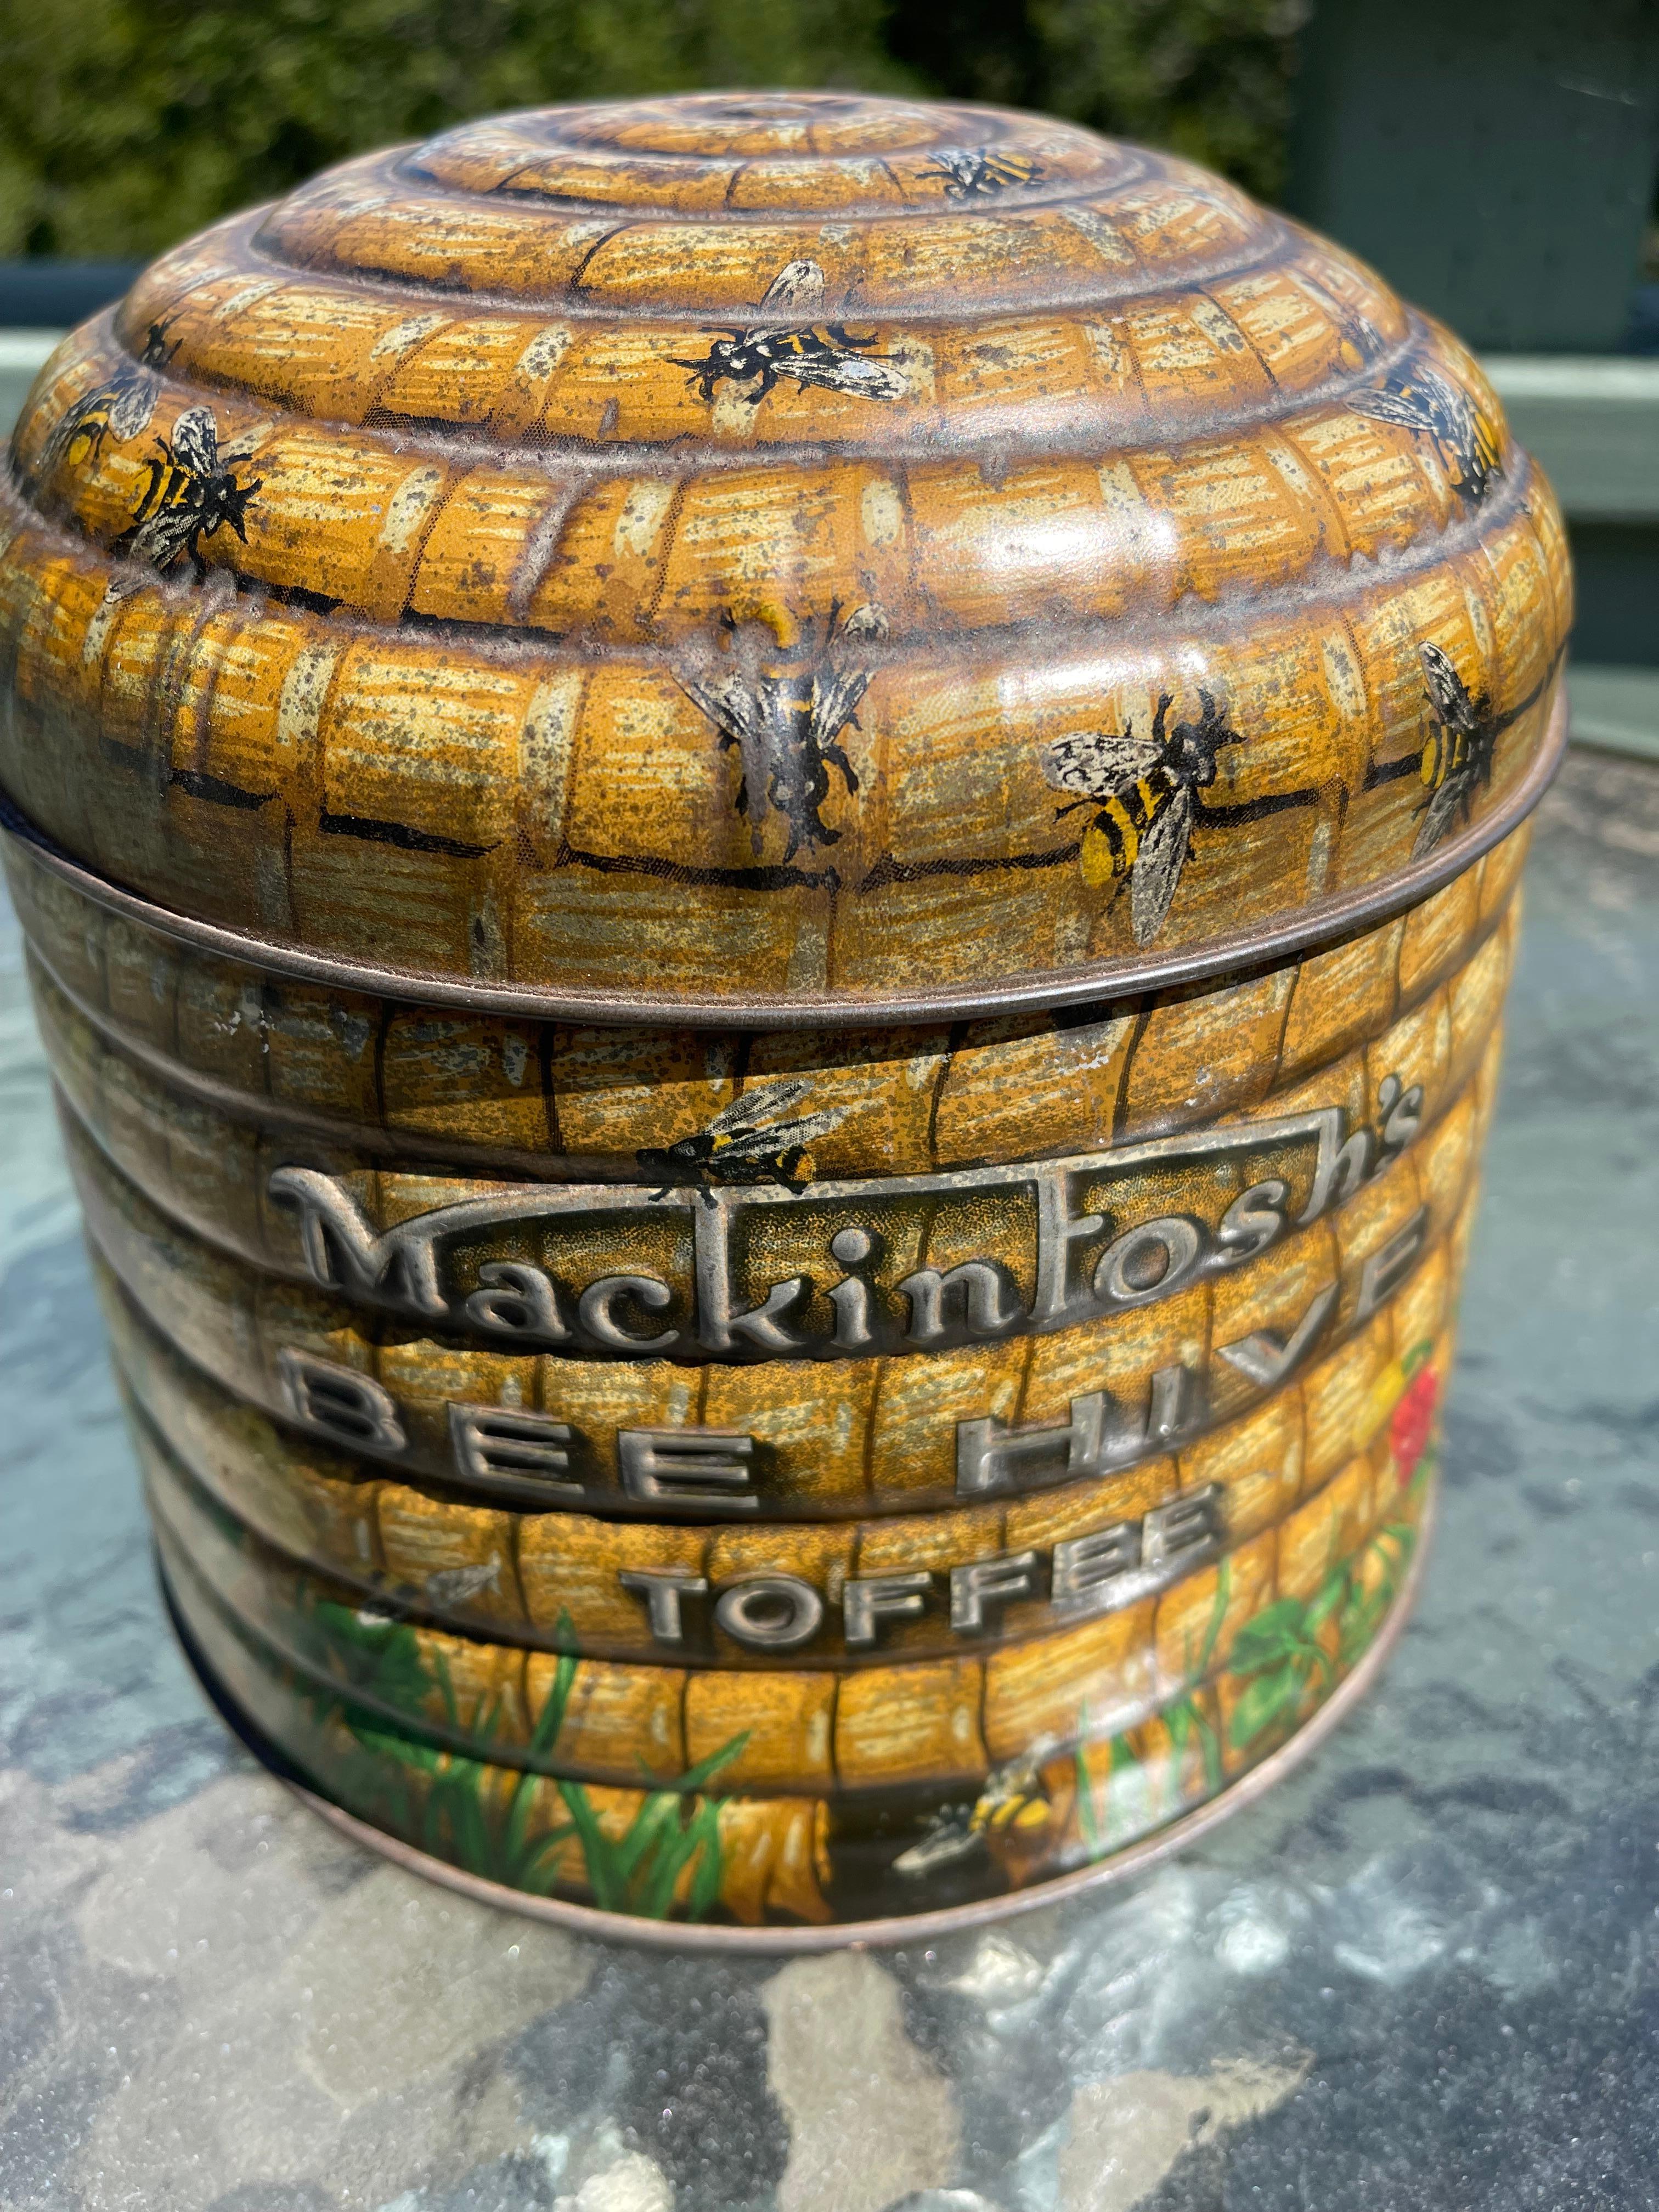 Early 20th Century Lithographed Tin Canister, Mackintosh Bee Hive Toffee, English ca. 1920's